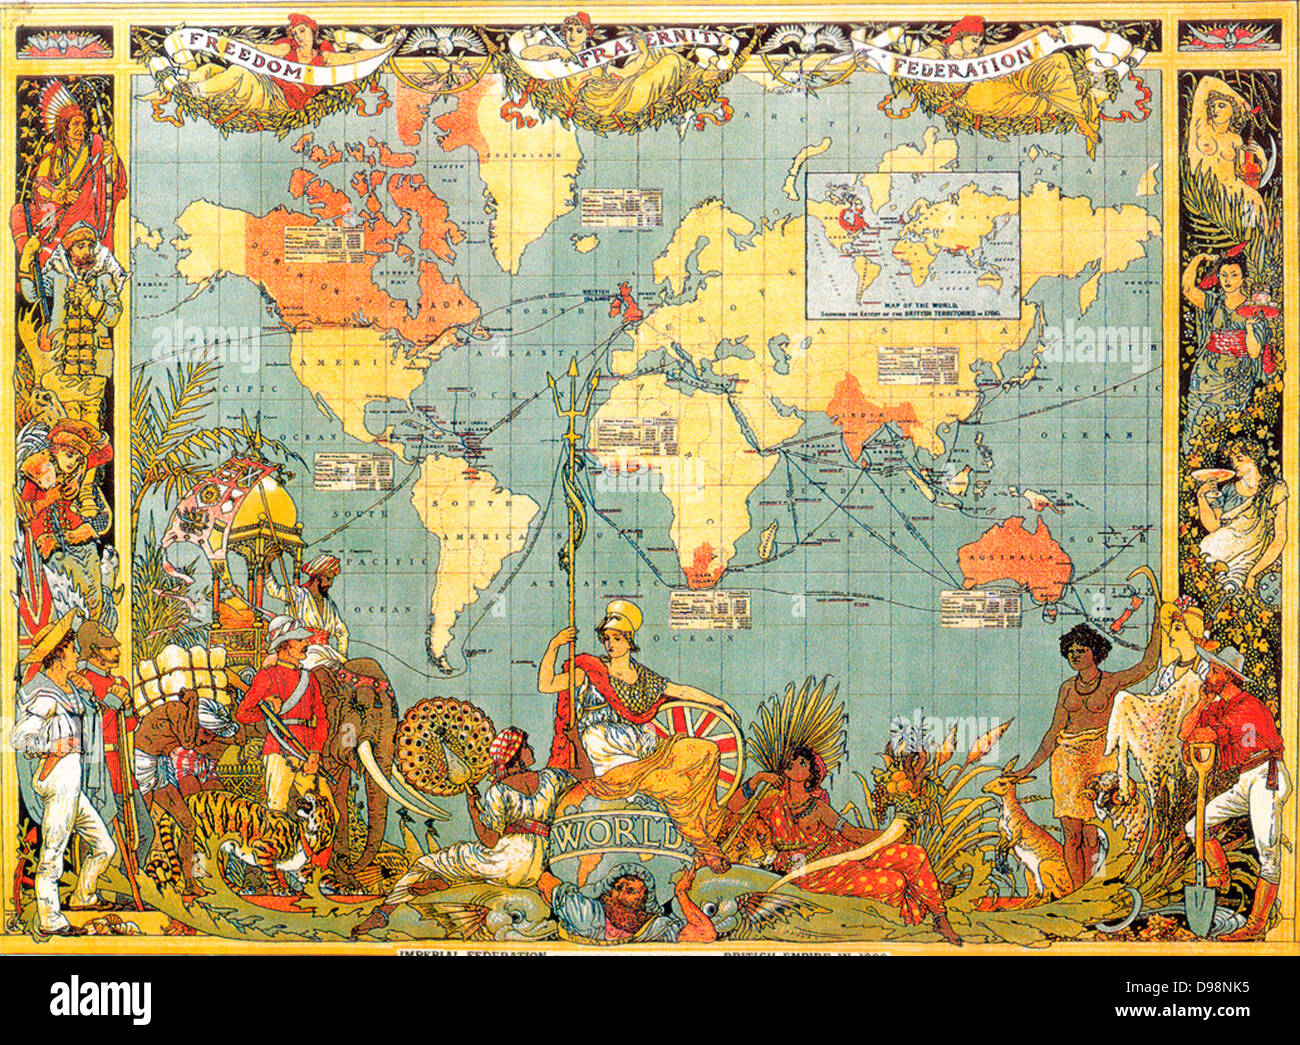 British Empire, 1886, a Federation of Britain, dominions, colonies, protectorates, and mandates spread throughout the world and controlled by Britannia's naval and military power. Colonialism Jingoism Chromolithograph Stock Photo